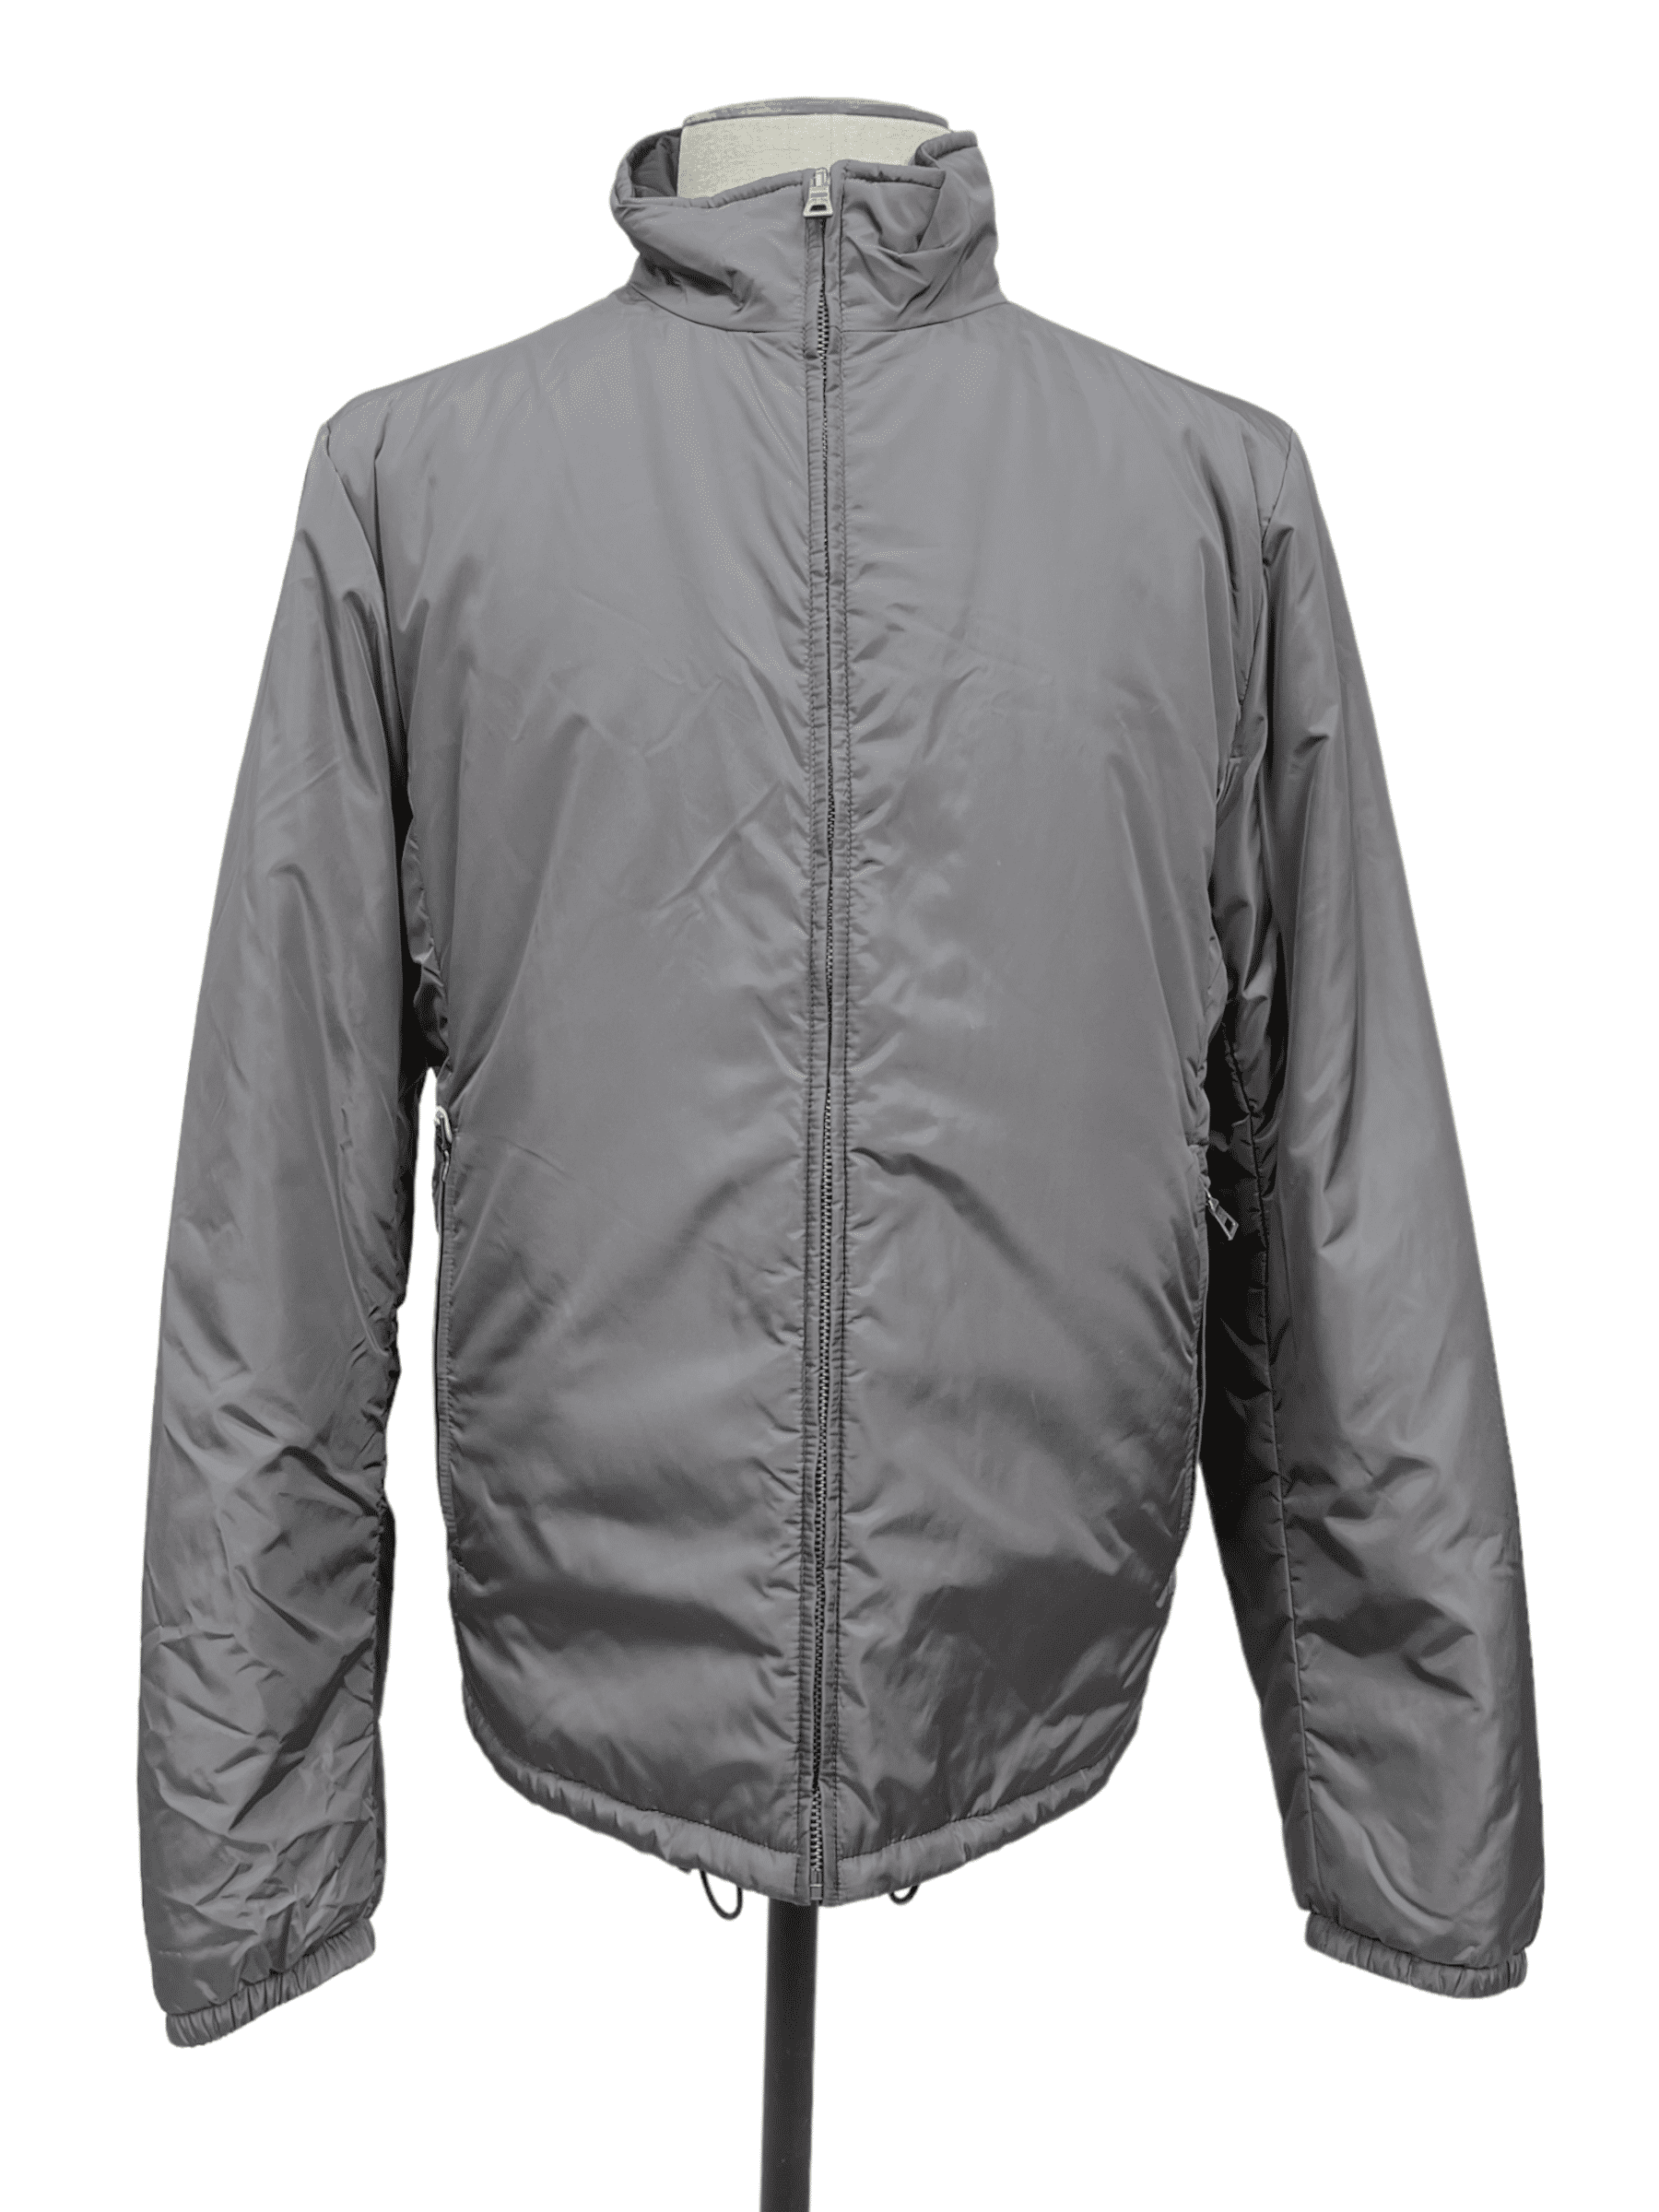 Prada Luna Rosa Reversible Puffer Jacket - Genuine Design Luxury Consignment for Men. New & Pre-Owned Clothing, Shoes, & Accessories. Calgary, Canada